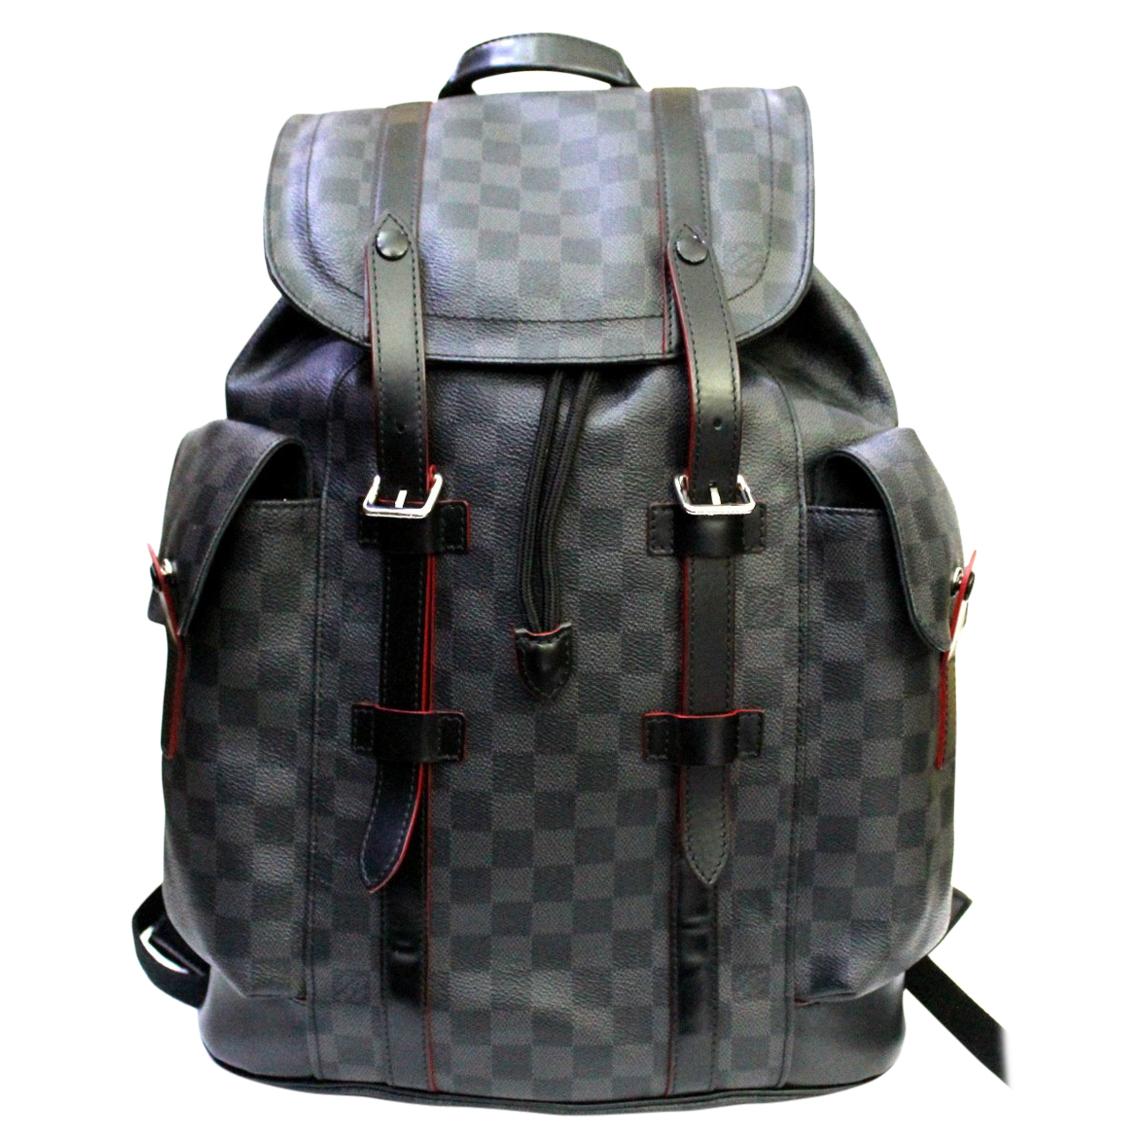 2015 Luois Vuitton Damier Graphite Christopher Backpack Bag